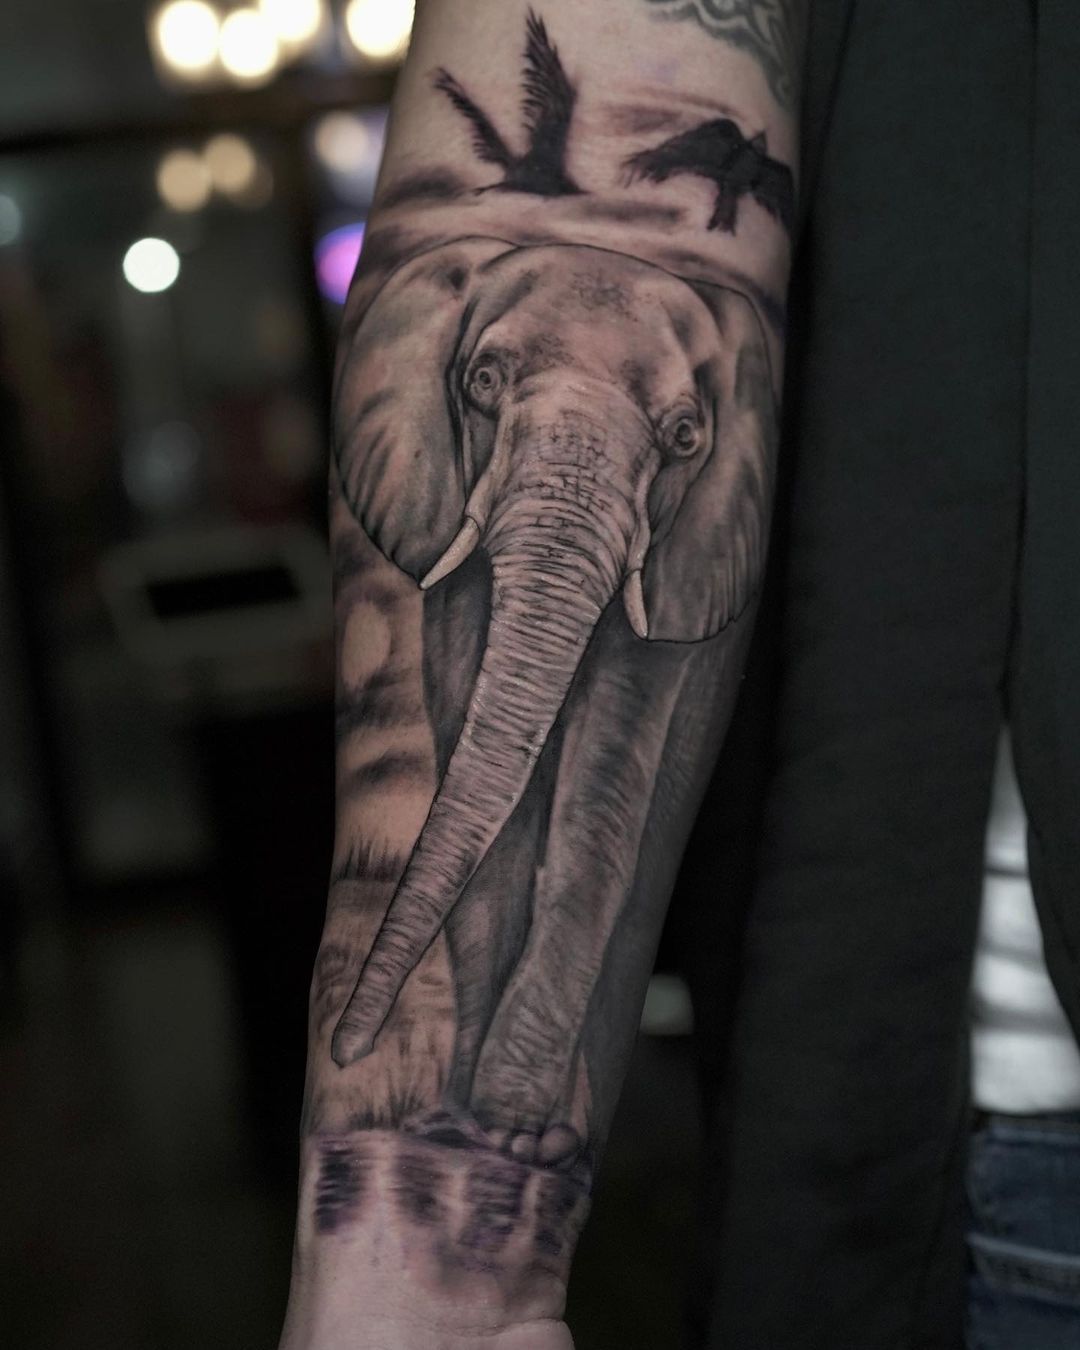 101 Best Thai Elephant Tattoo Ideas That Will Bow Your Mind!